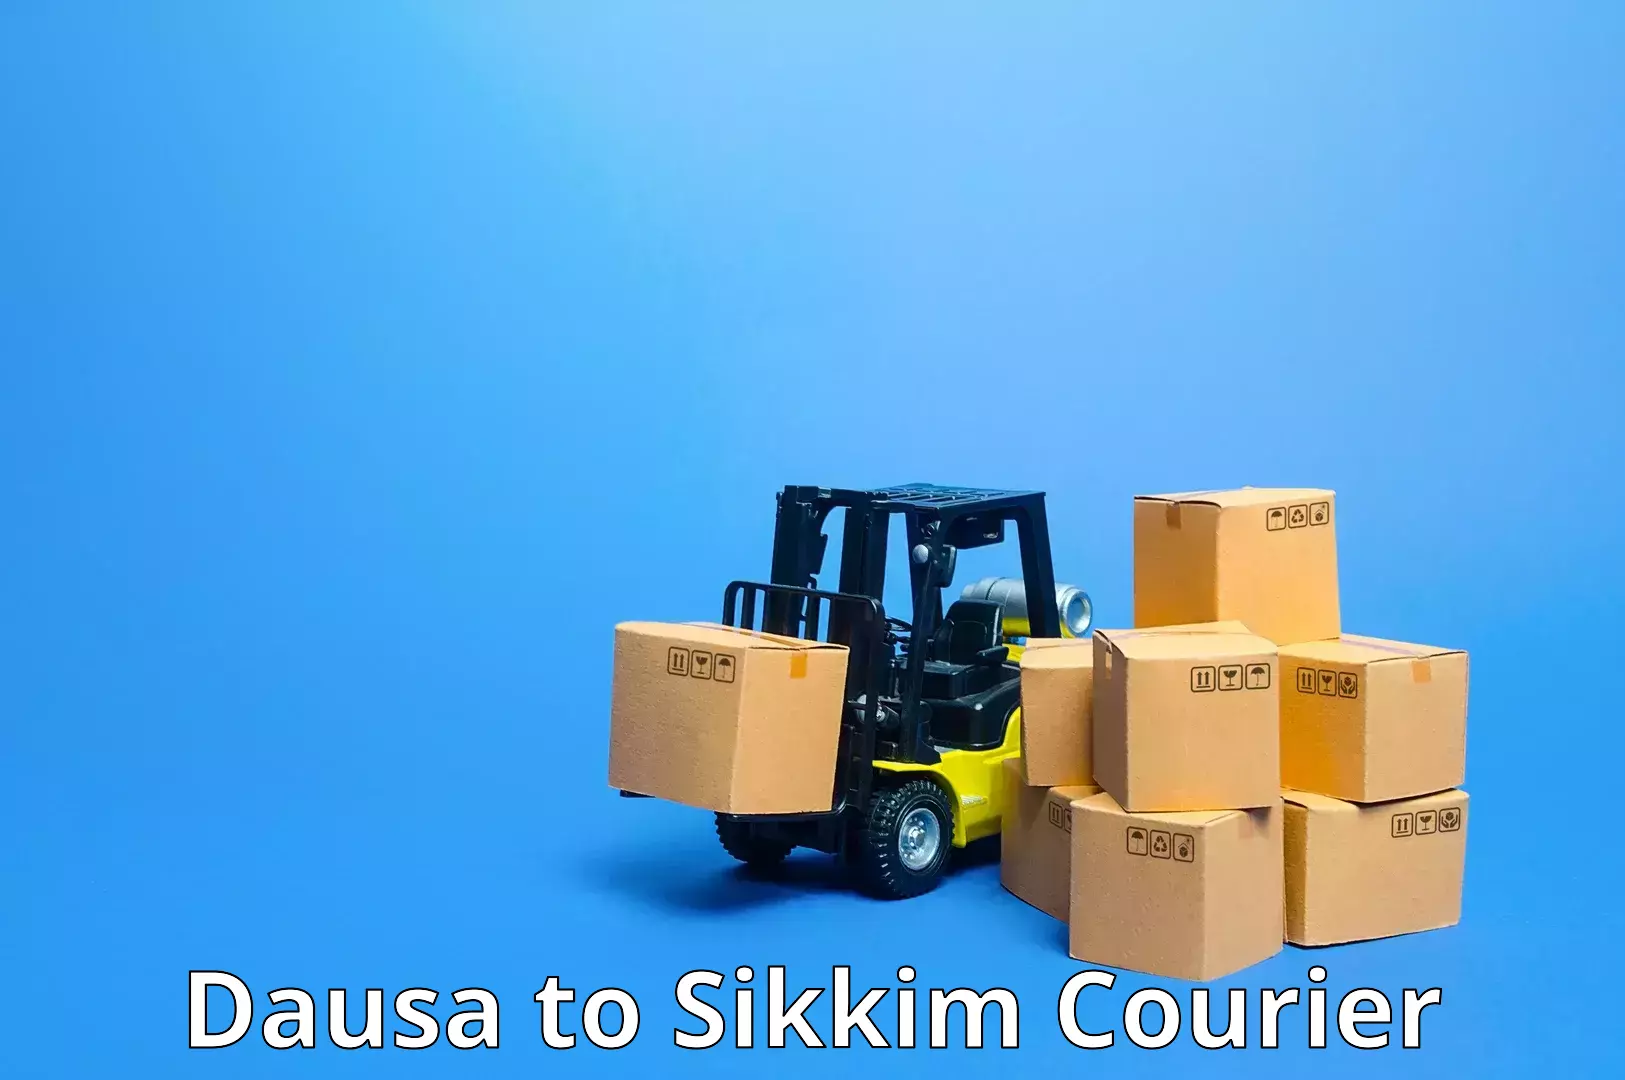 Customer-centric shipping Dausa to Pelling